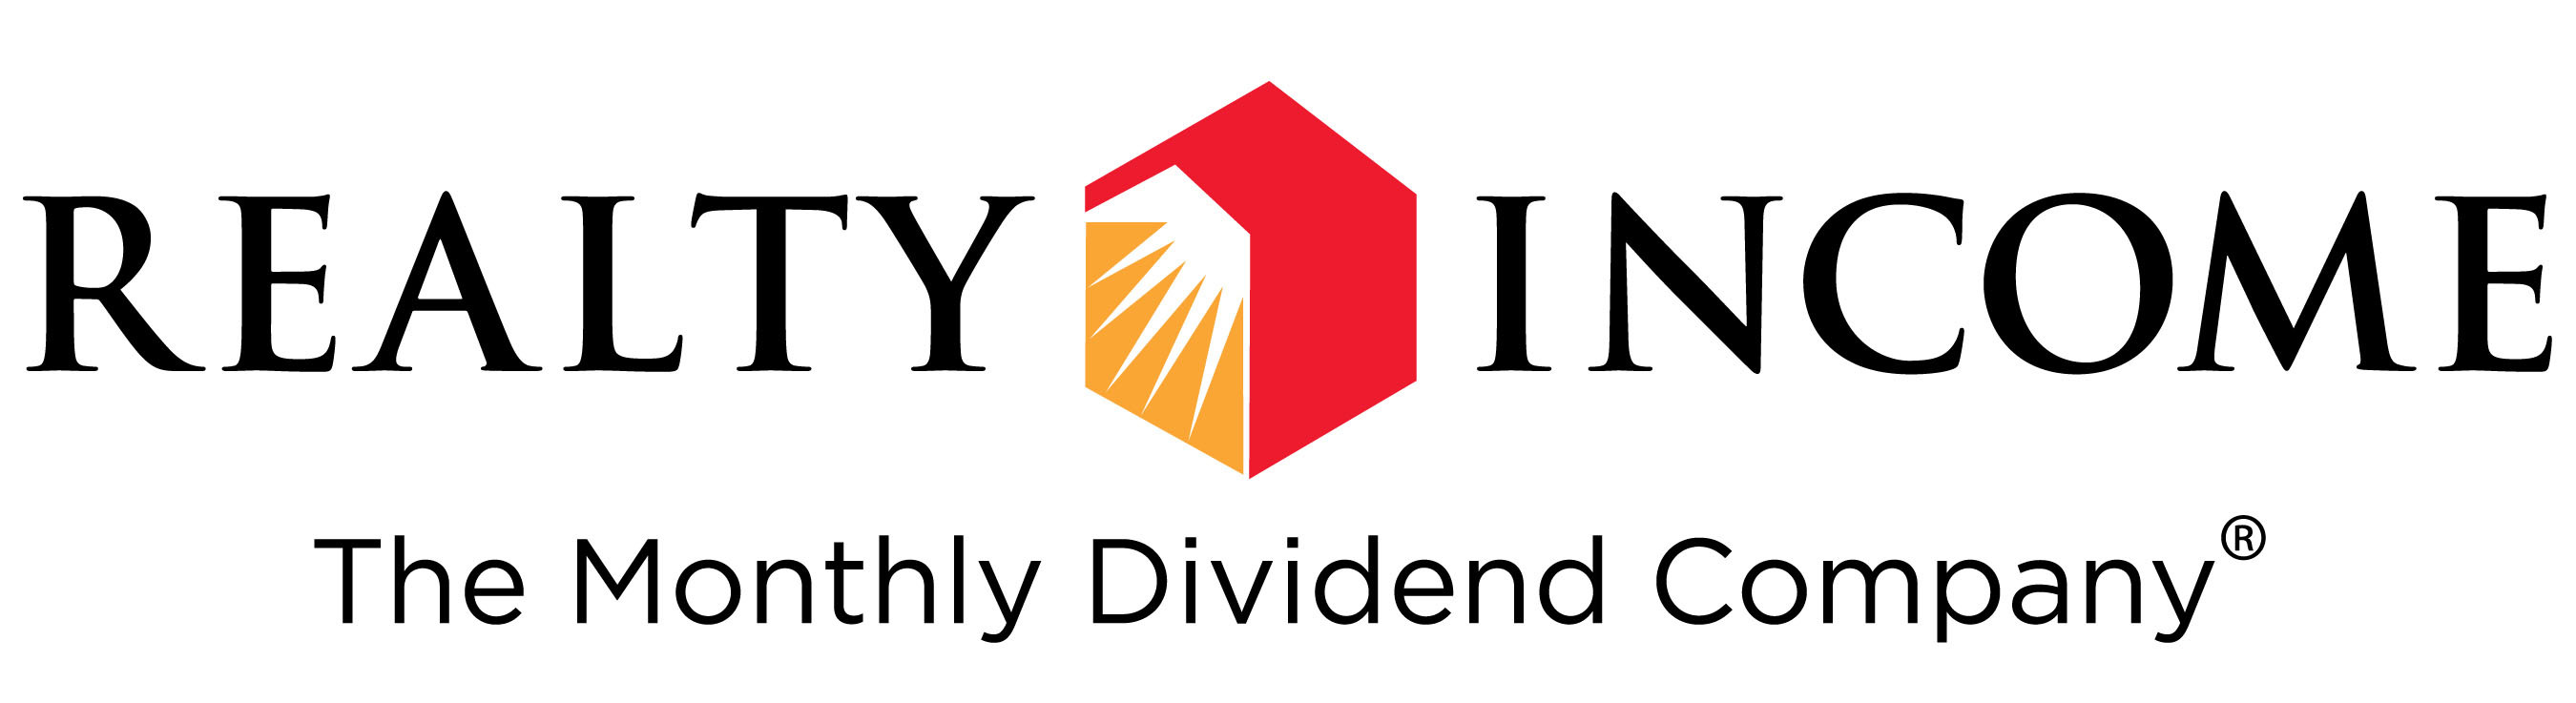 Realty Income Corporation - The Monthly Dividend Company